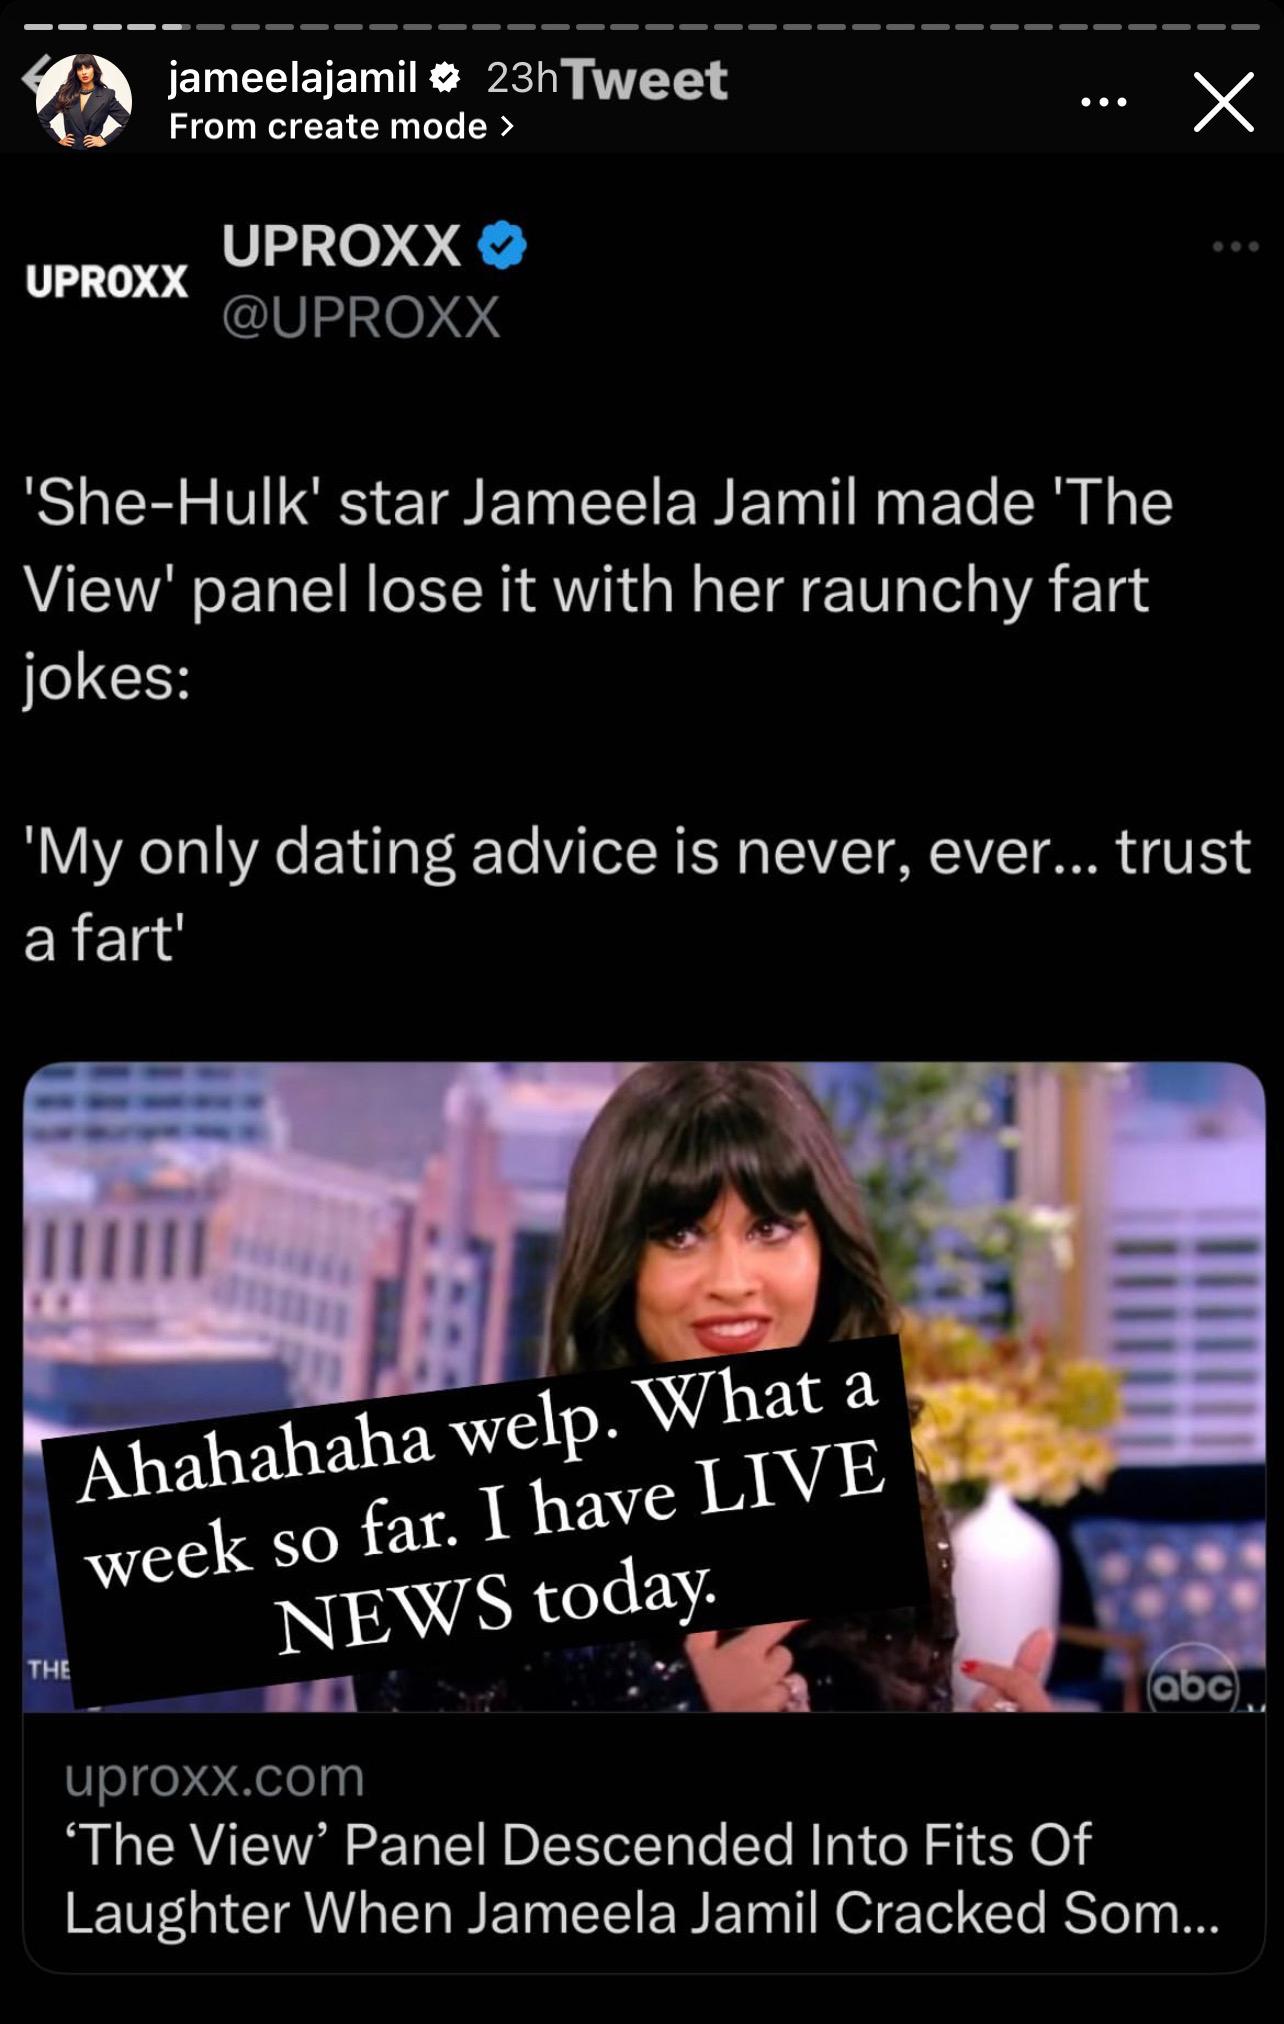 Jameela Jamil Reacts To Media's Coverage Of Her Appearance On 'The View'